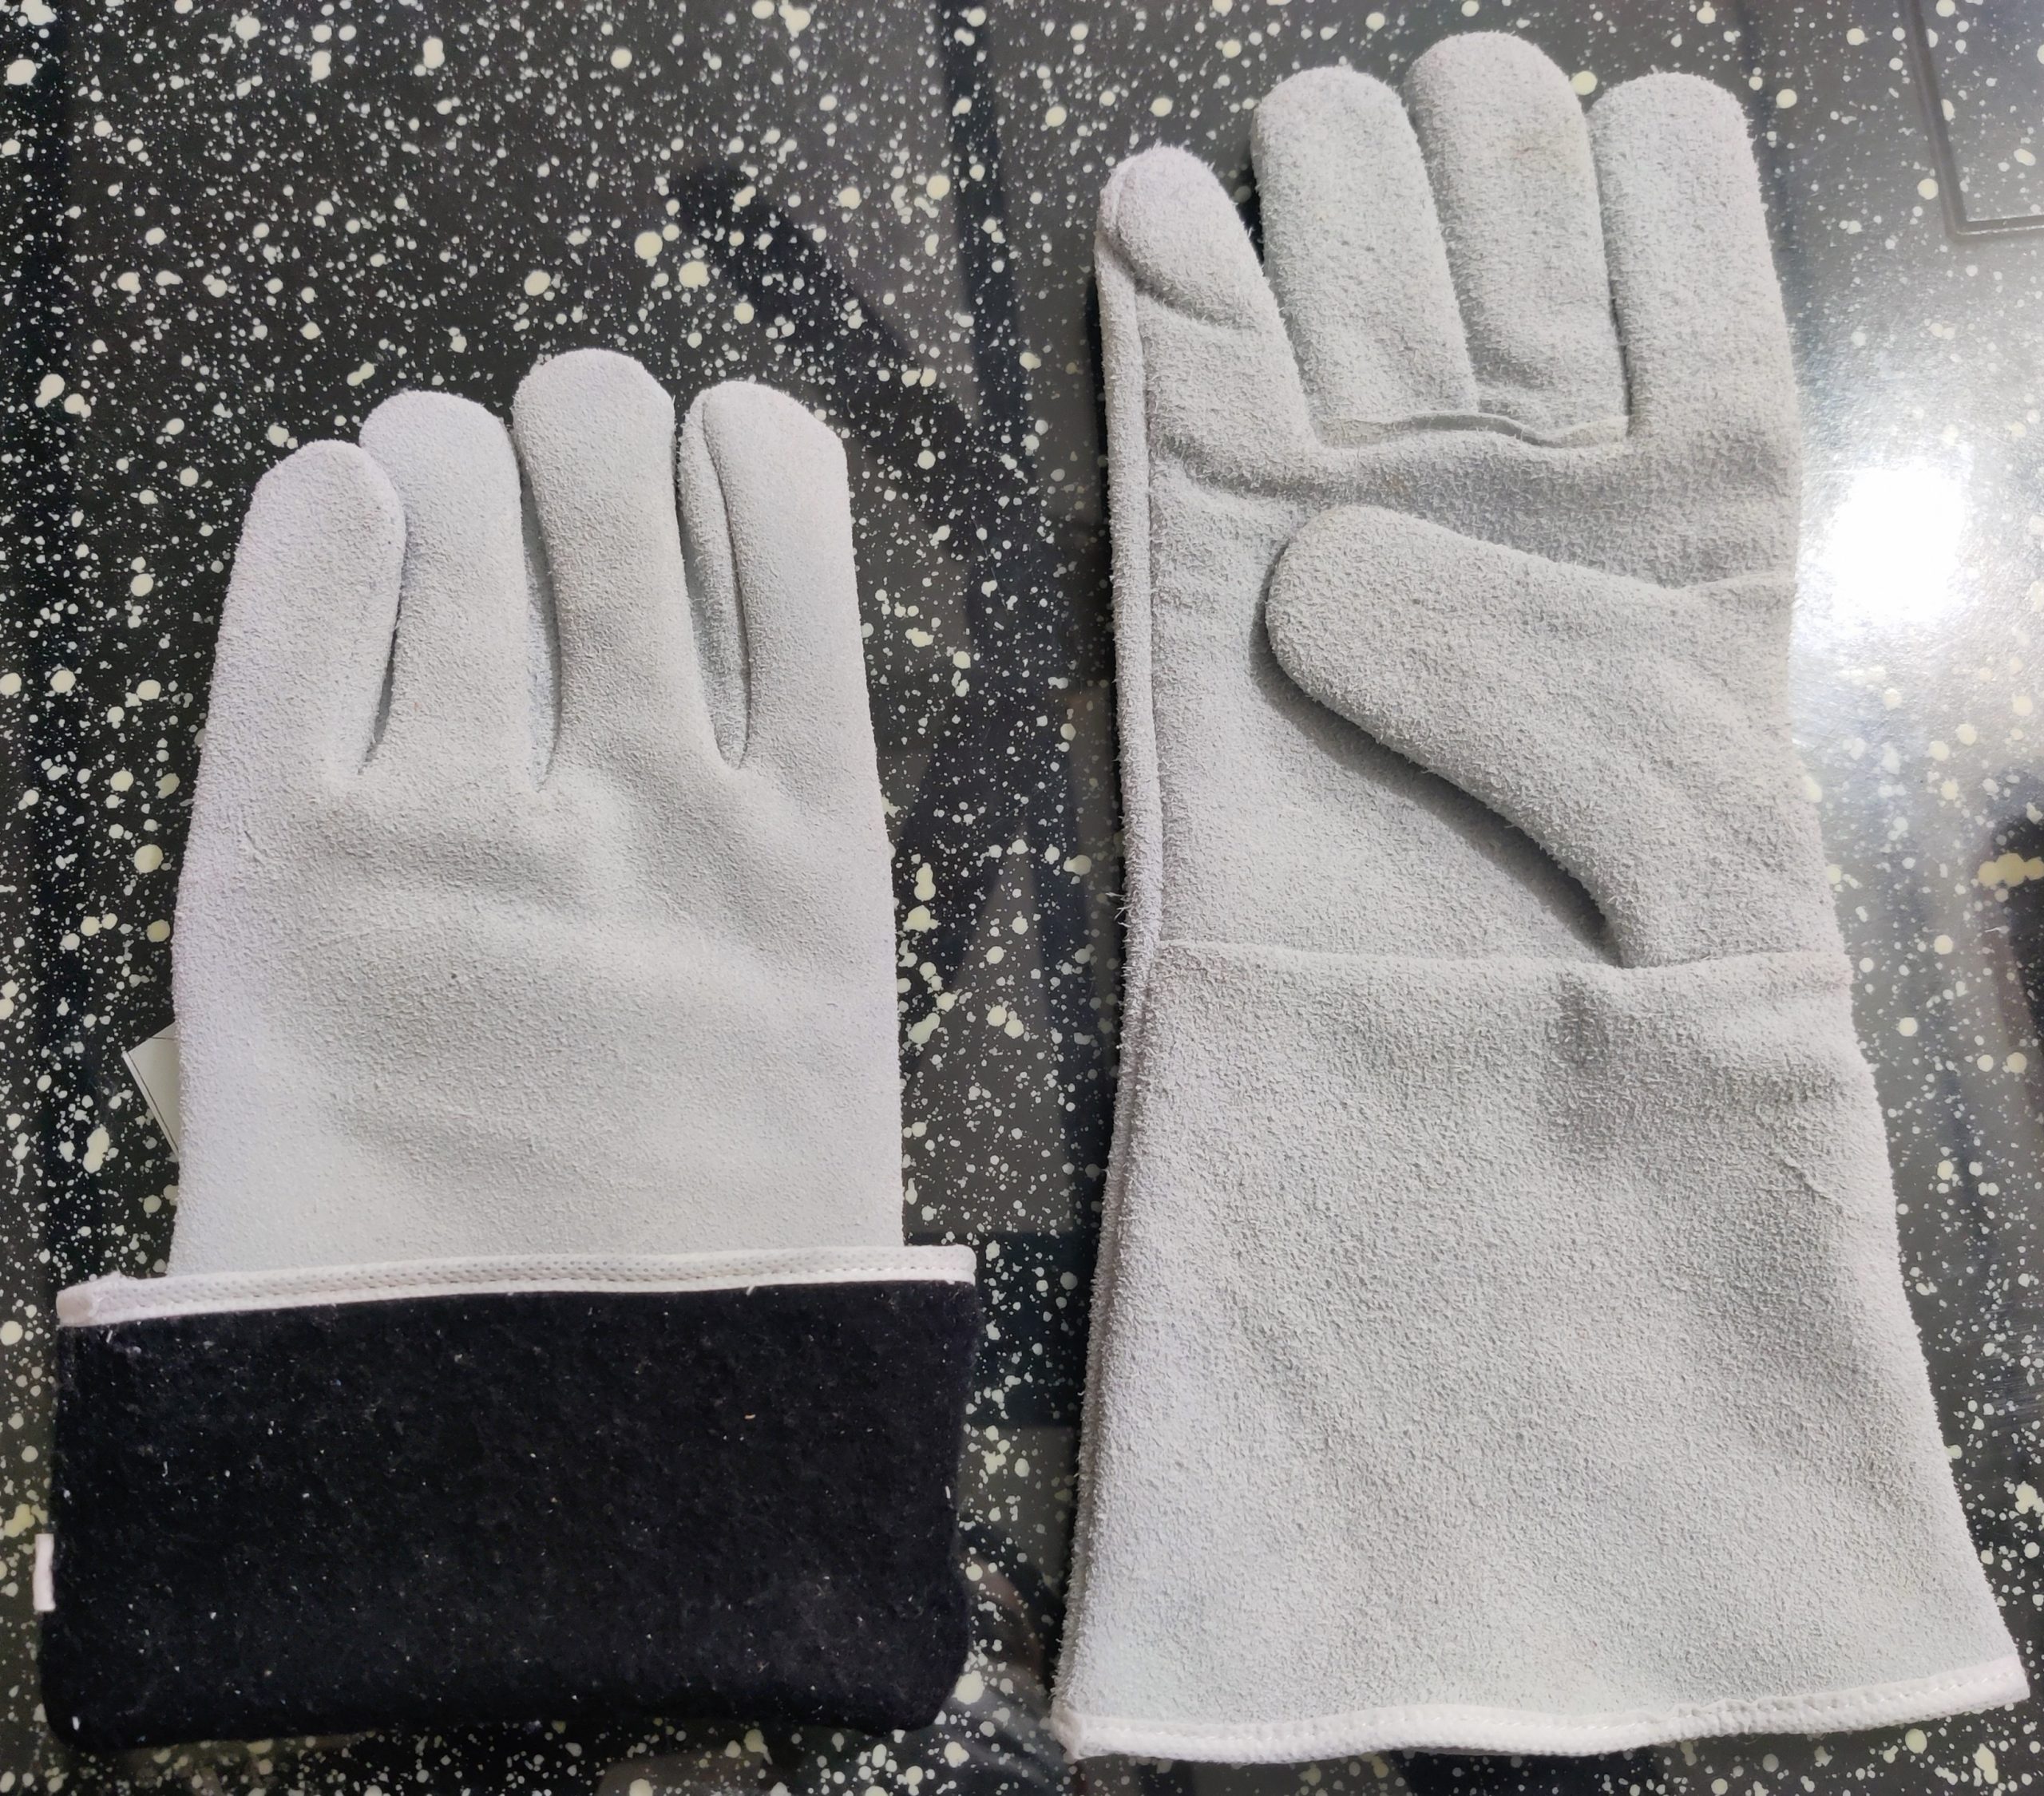 Leather hand gloves for welding work